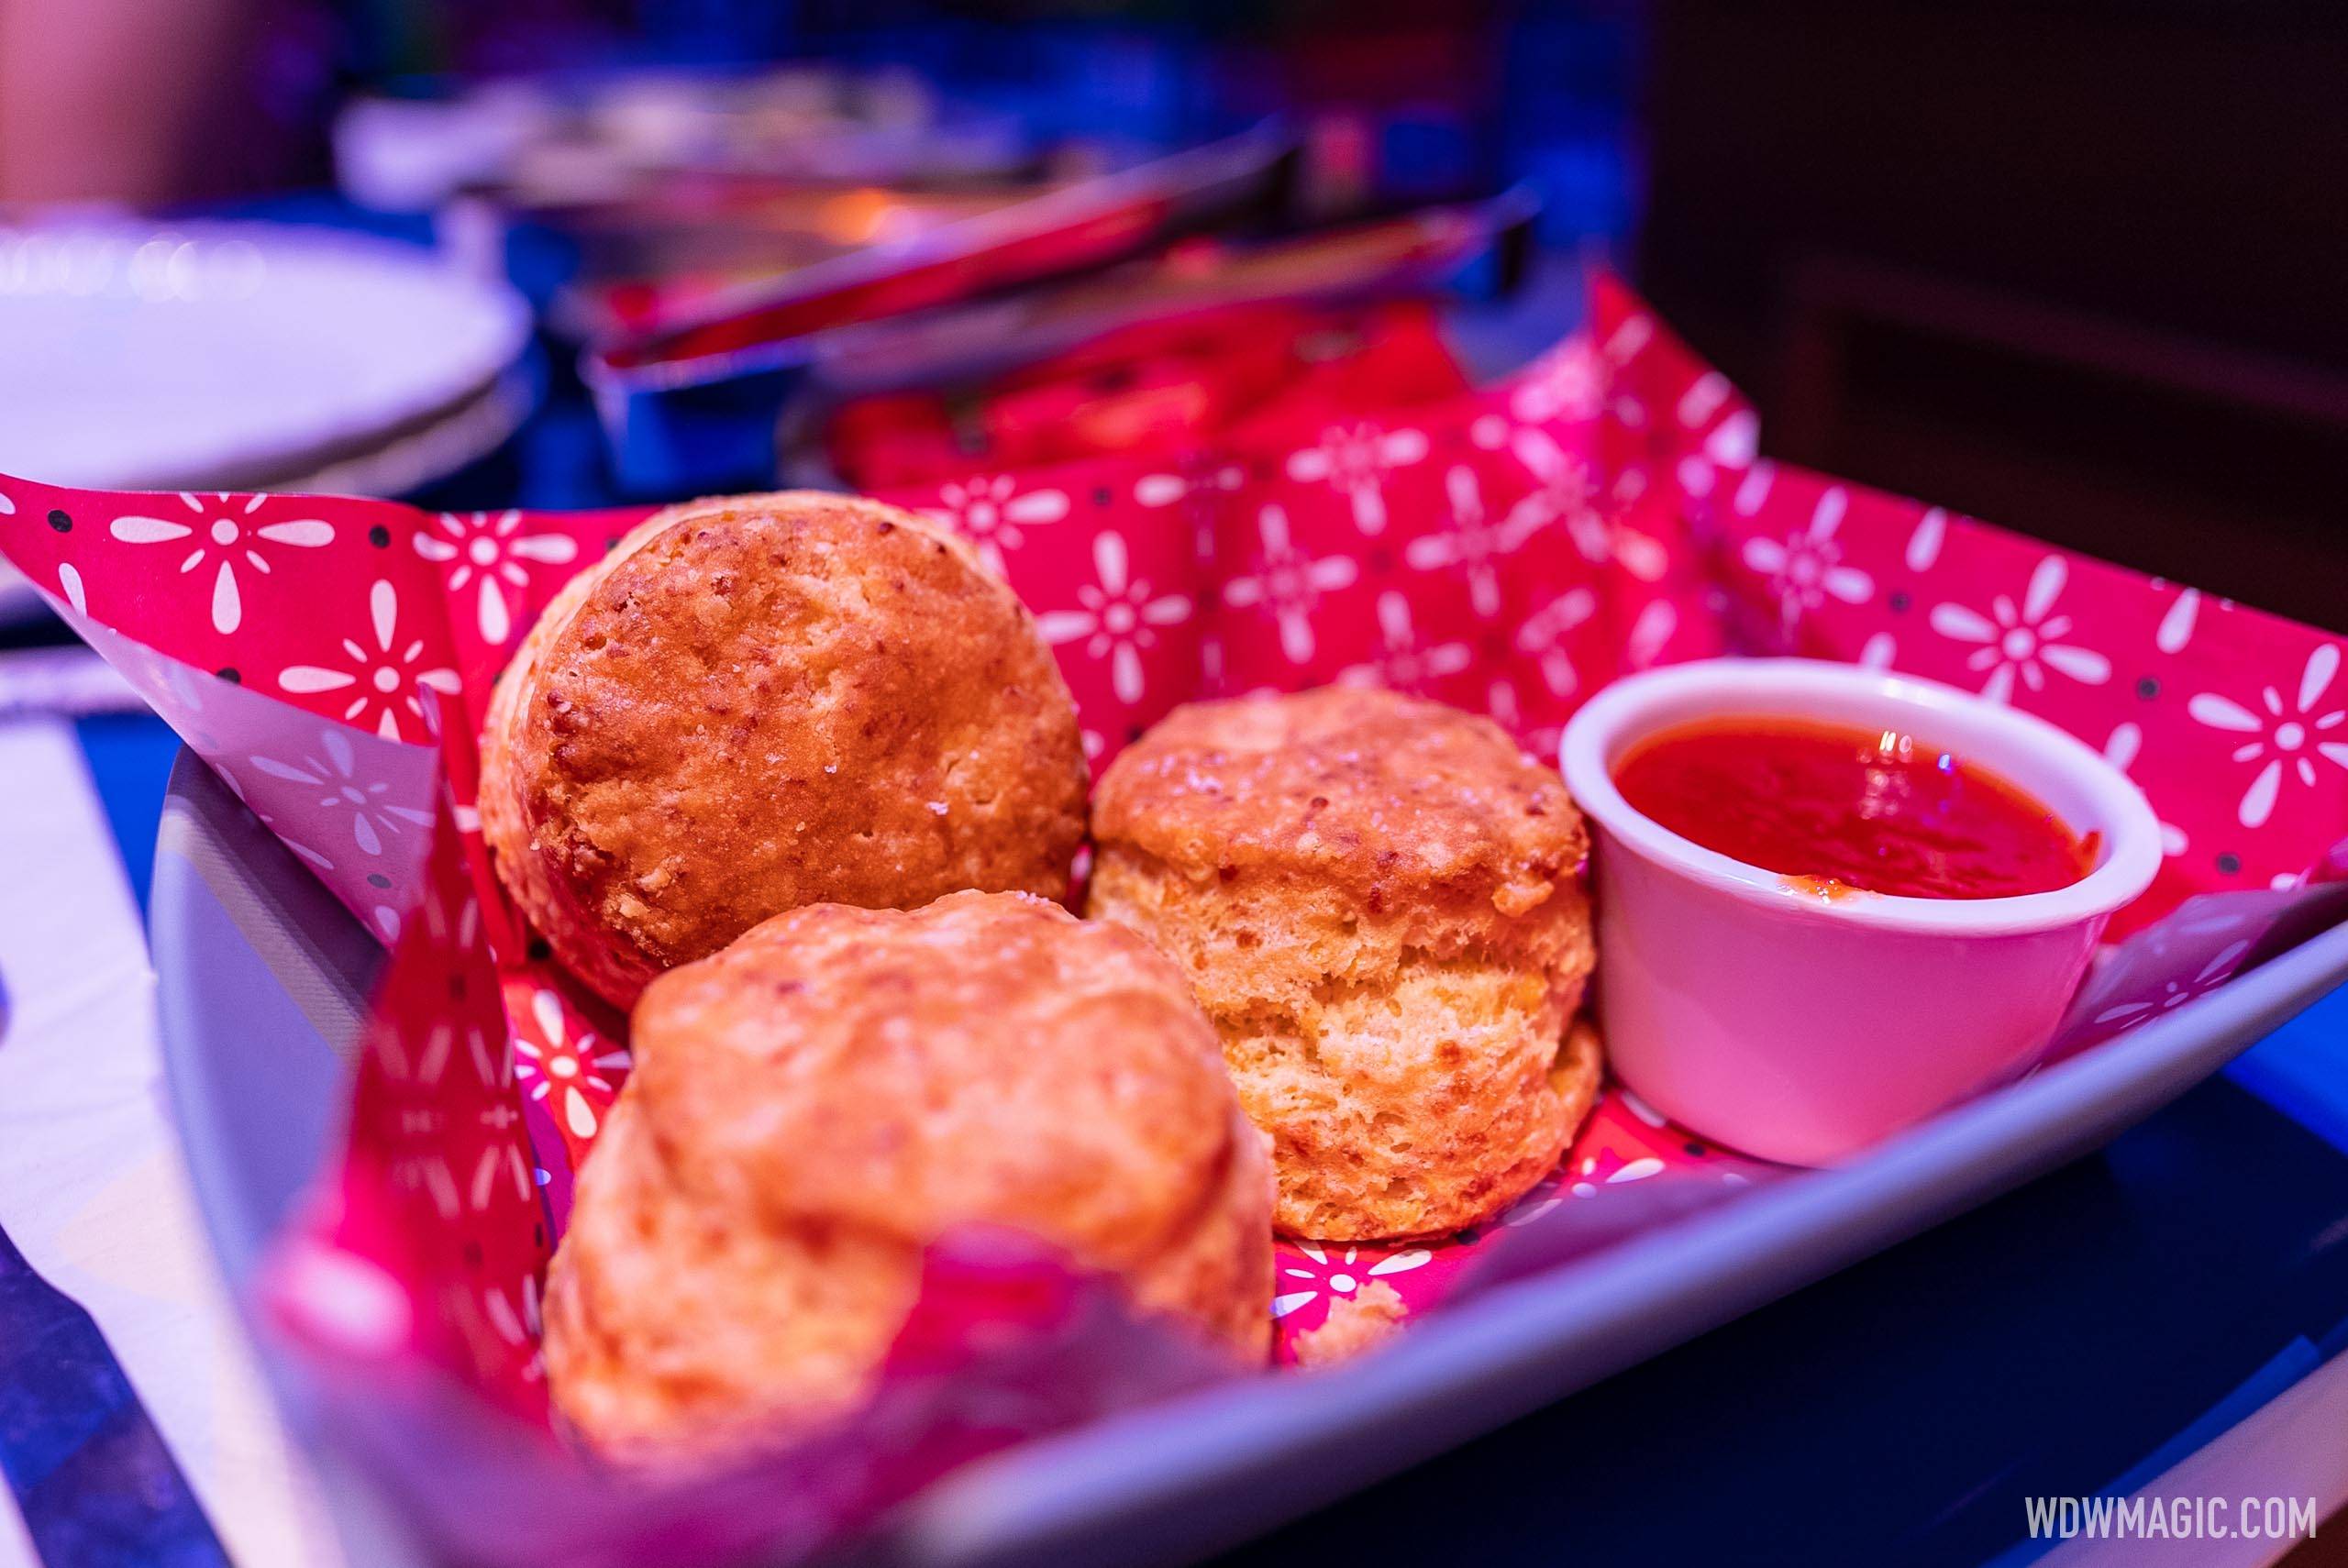 The Prospector’s Homemade Cheddar Biscuits with Sweet Pepper Jelly